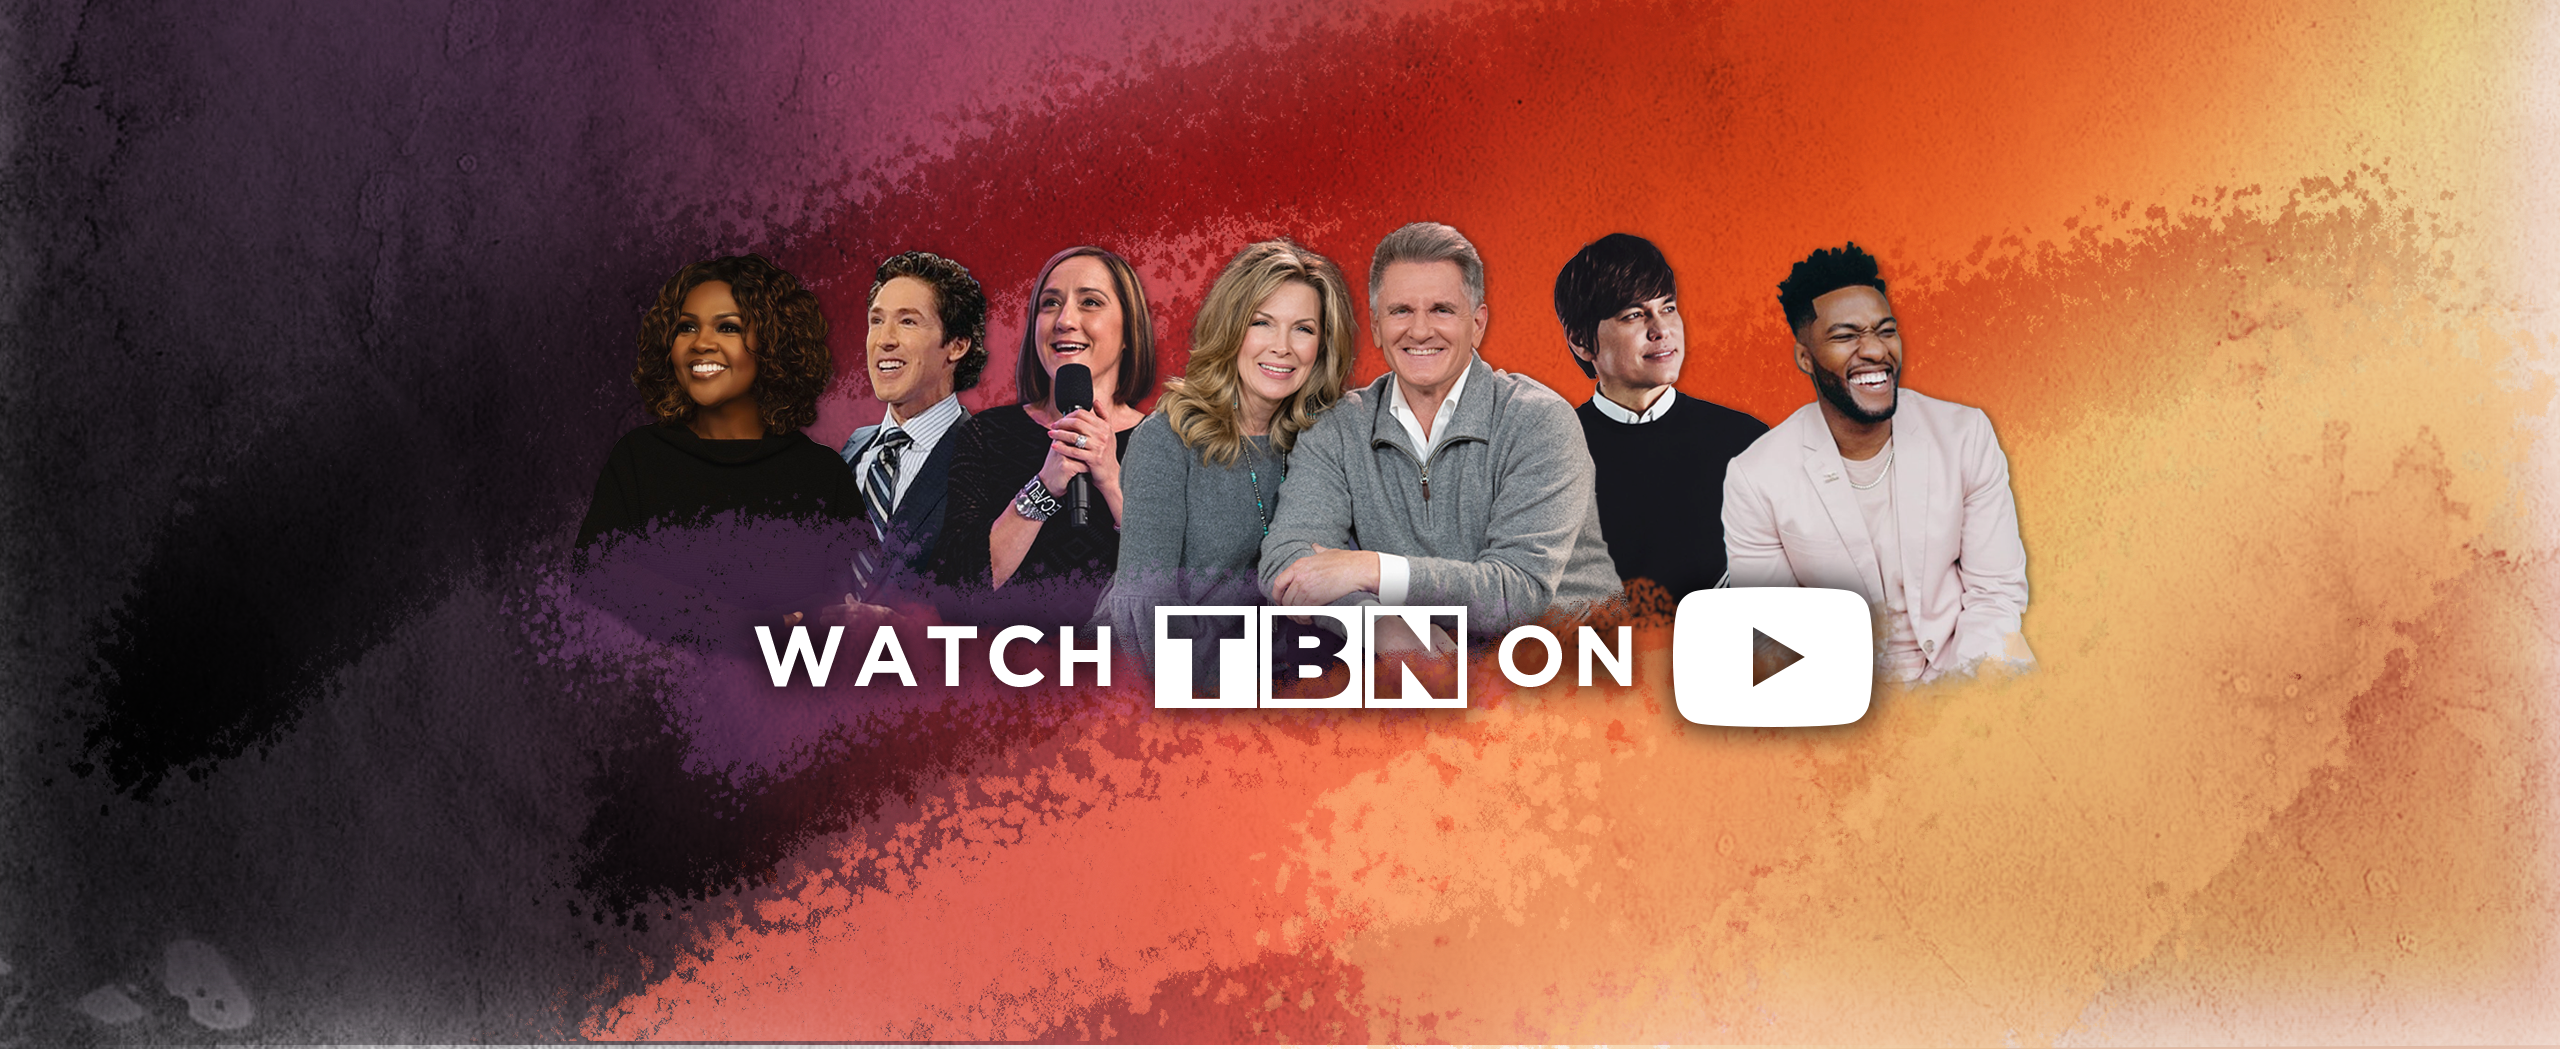 TBN Youtube Landing Page Header